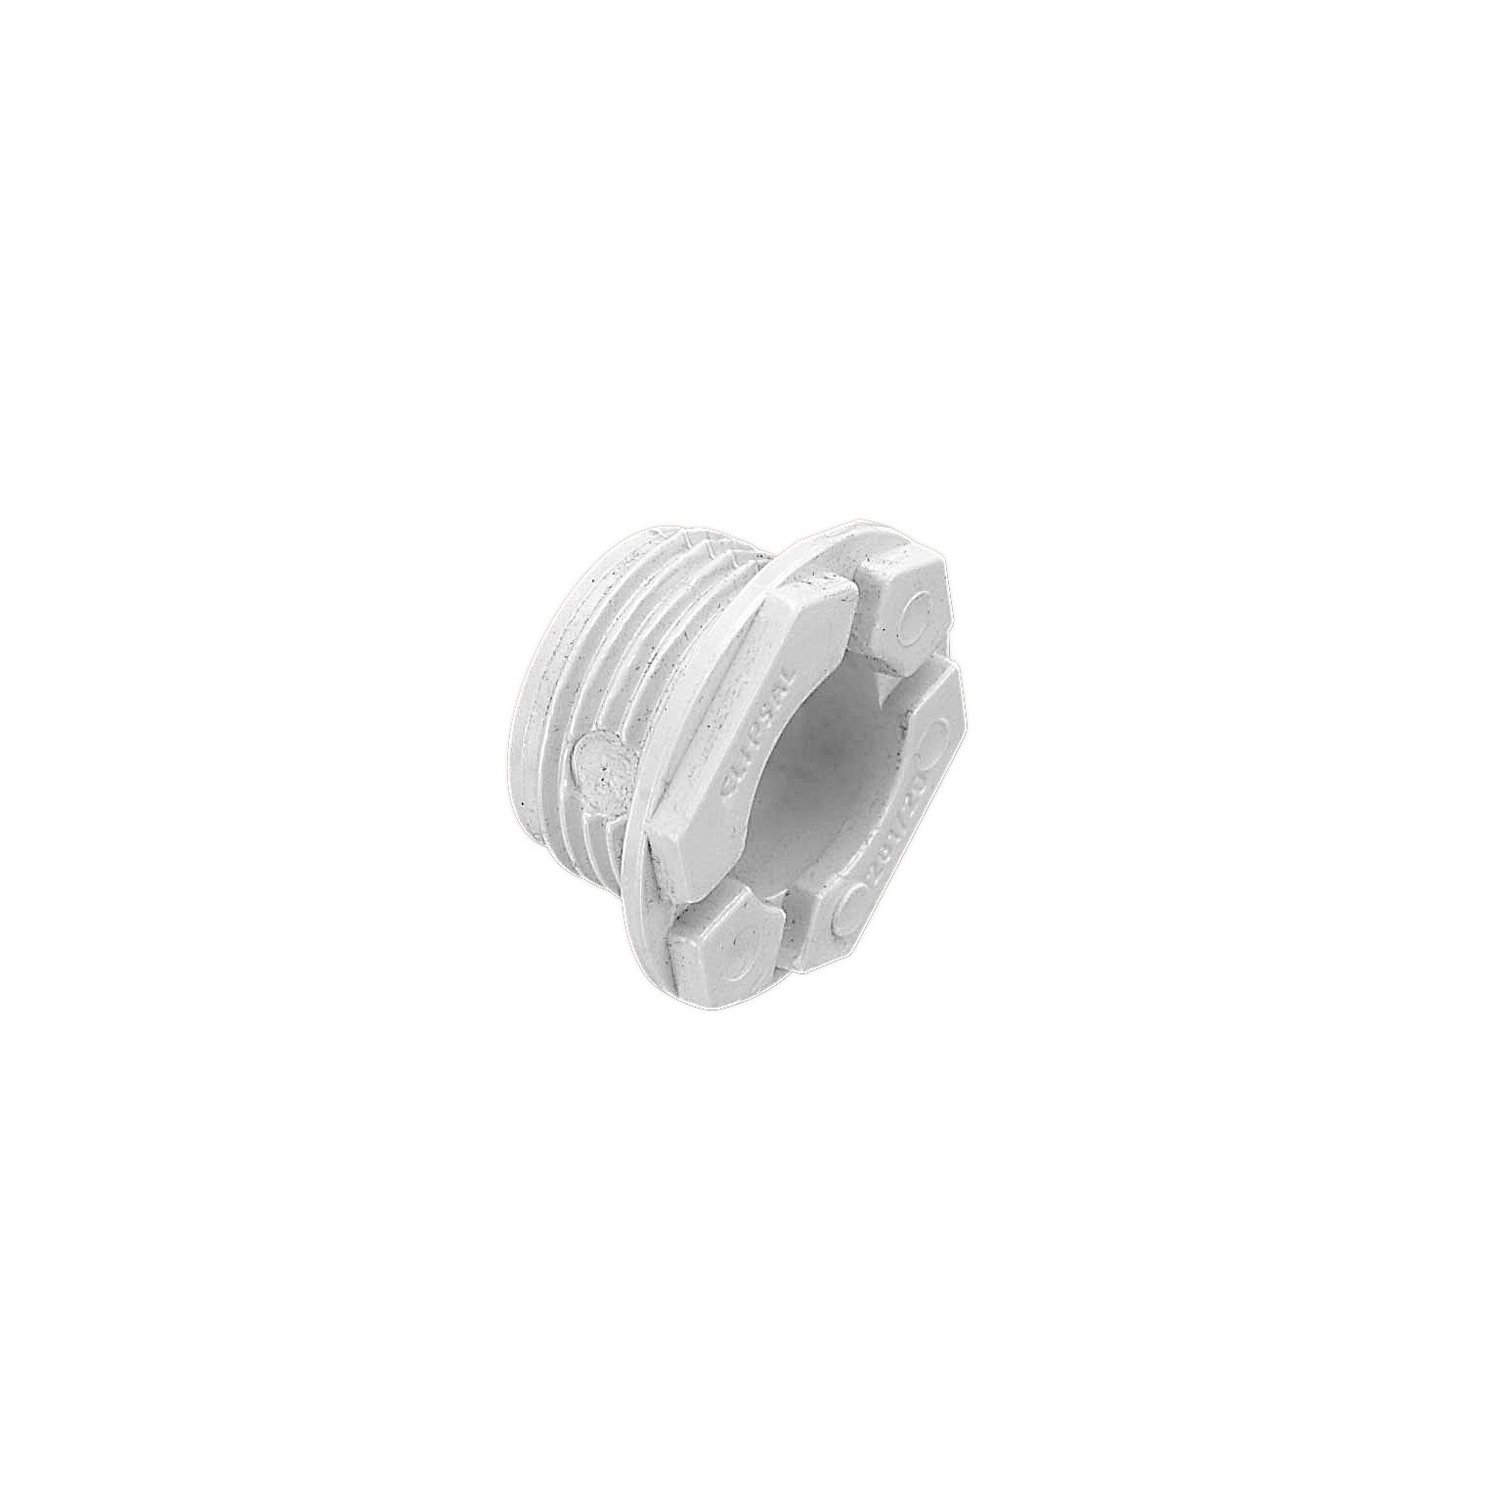 Solid Fittings - PVC, Male Bushes, 16mm, Grey